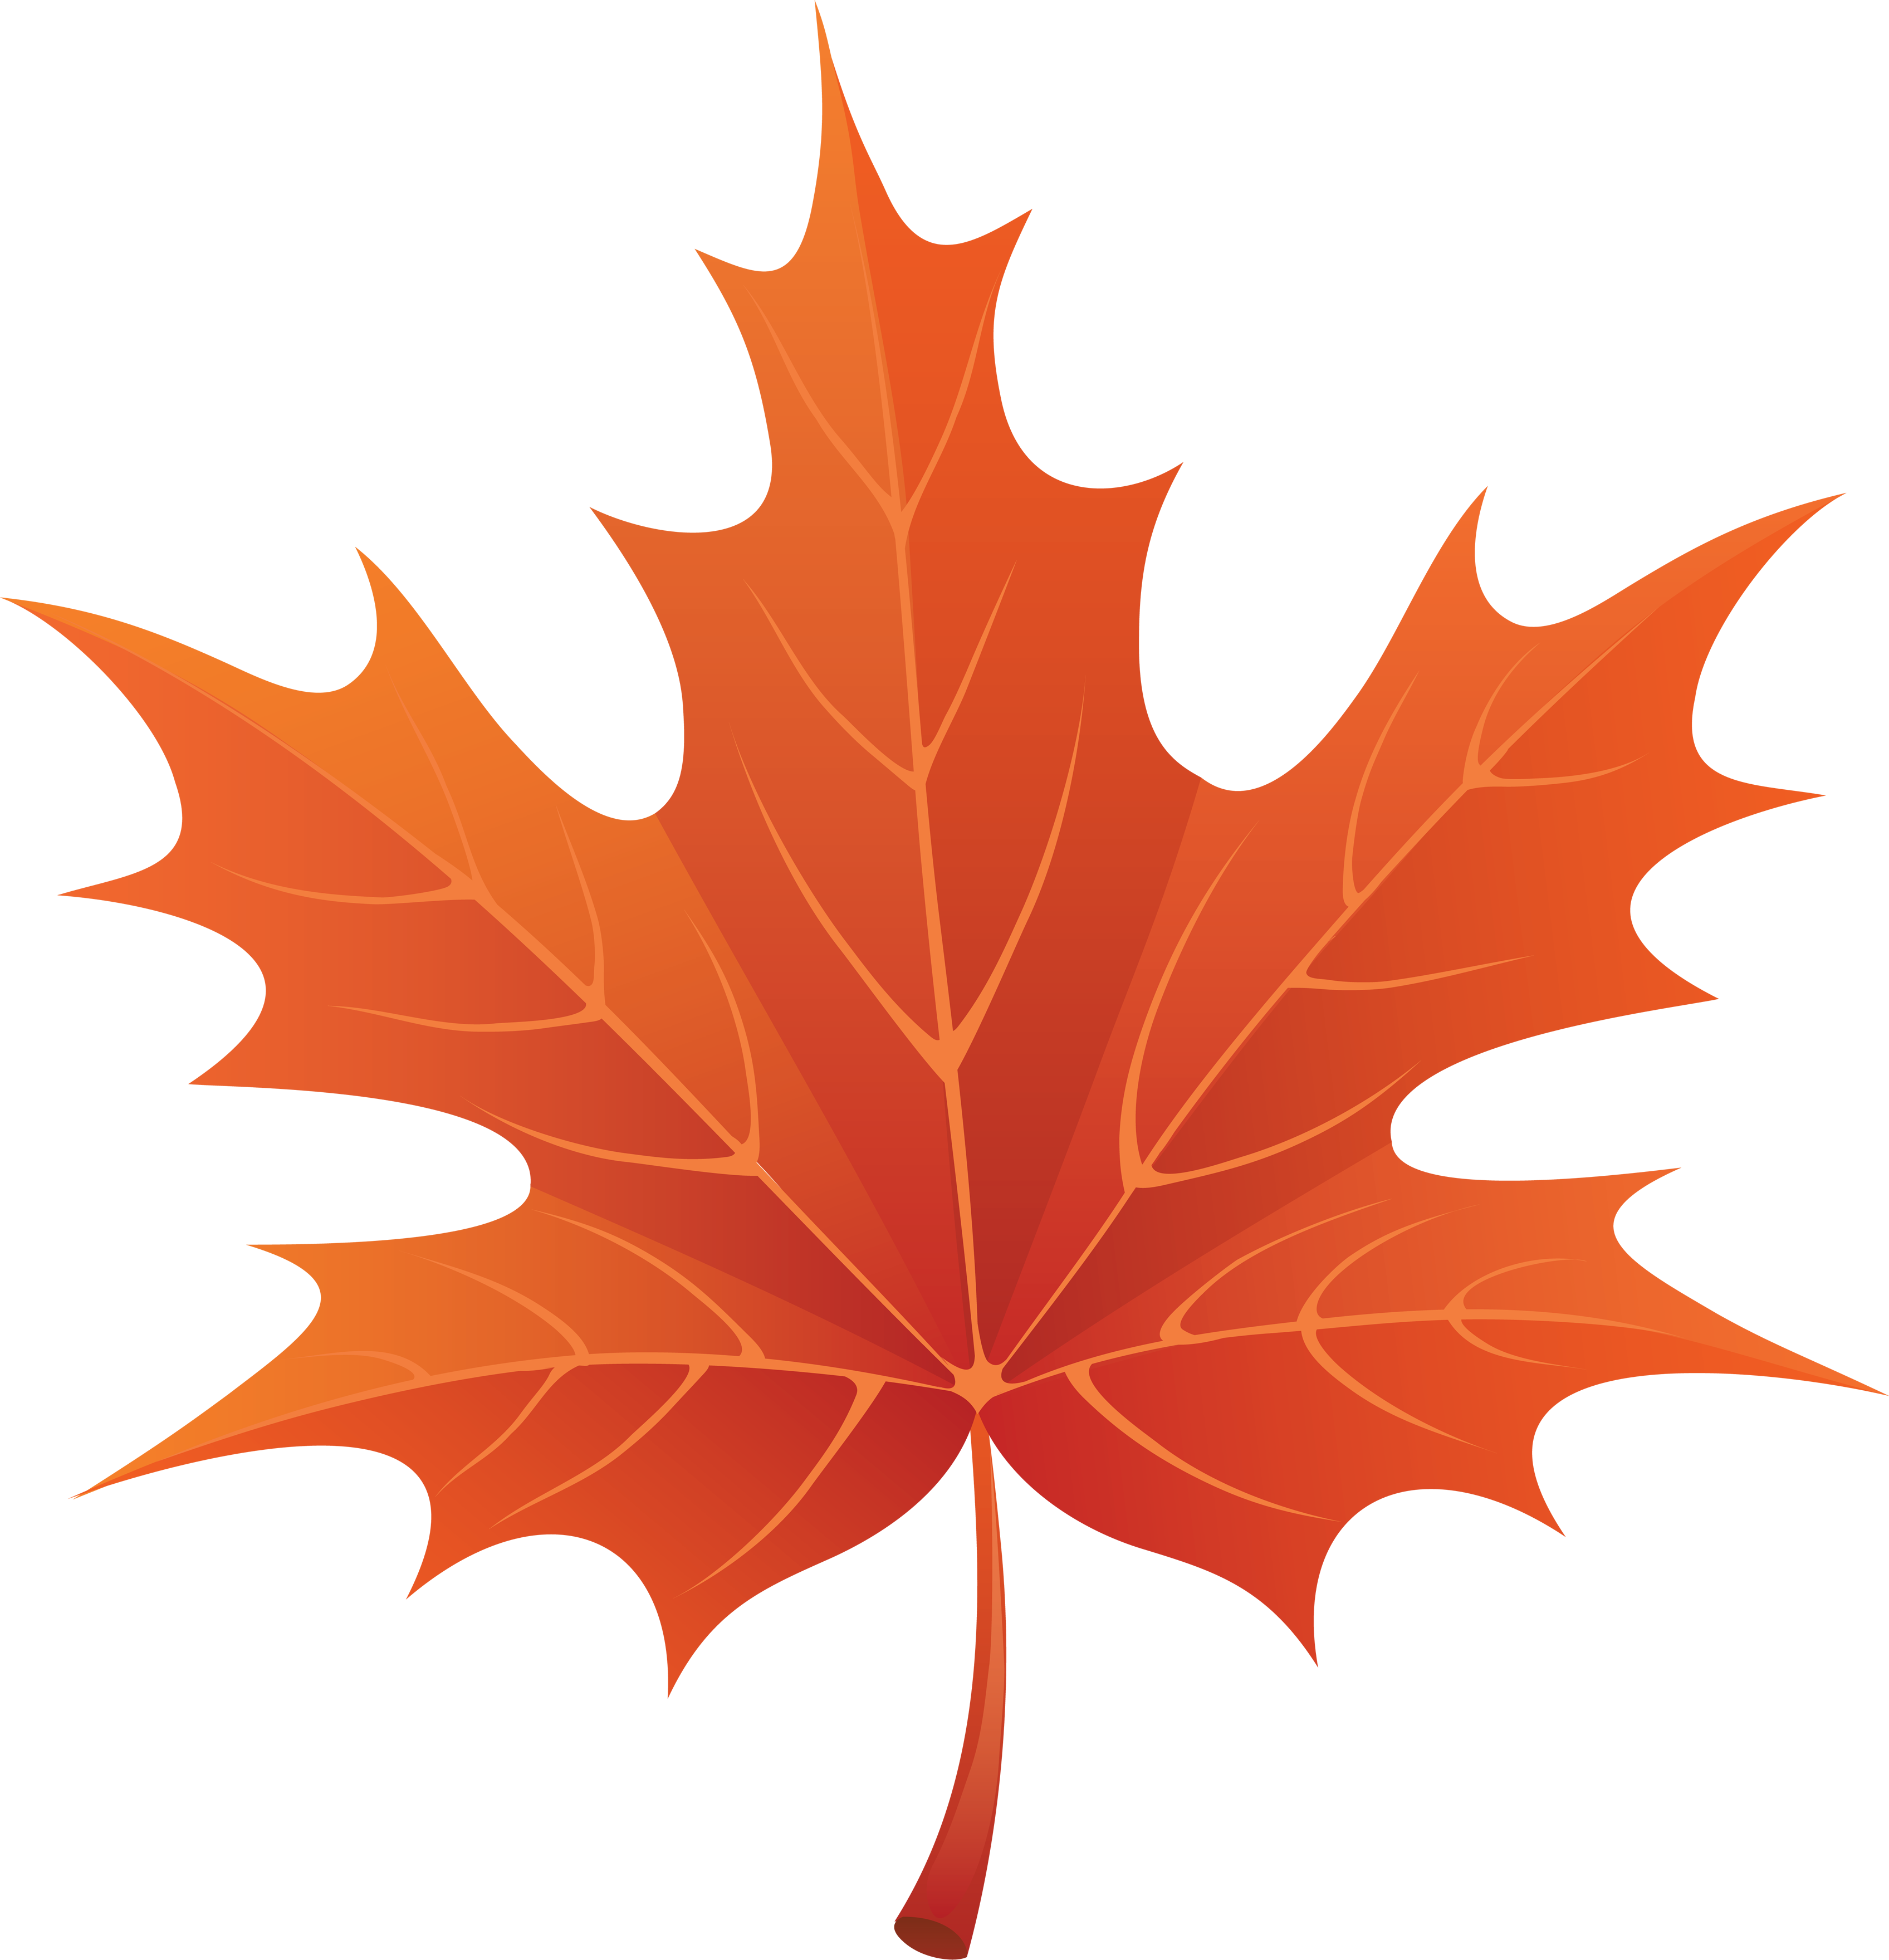 Falling clipart autumn. Fall leaves images free